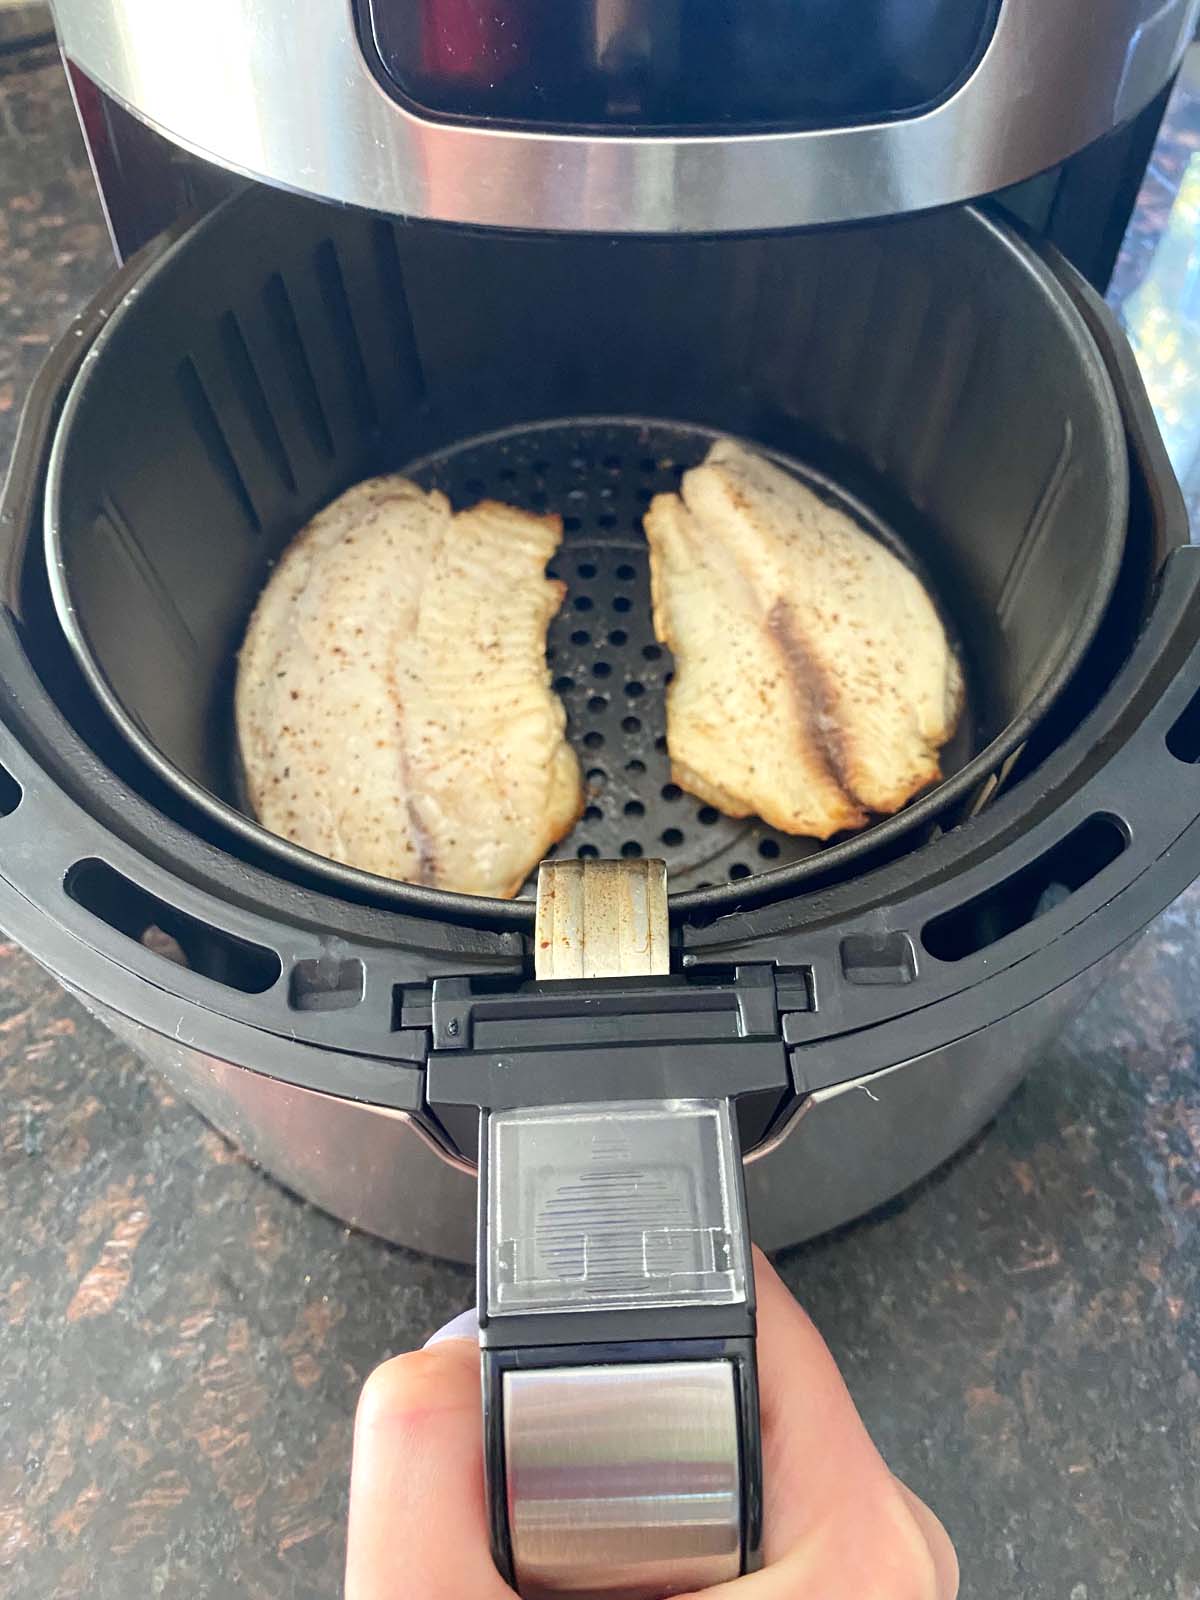 Cooked tilapia filets in an air fryer.